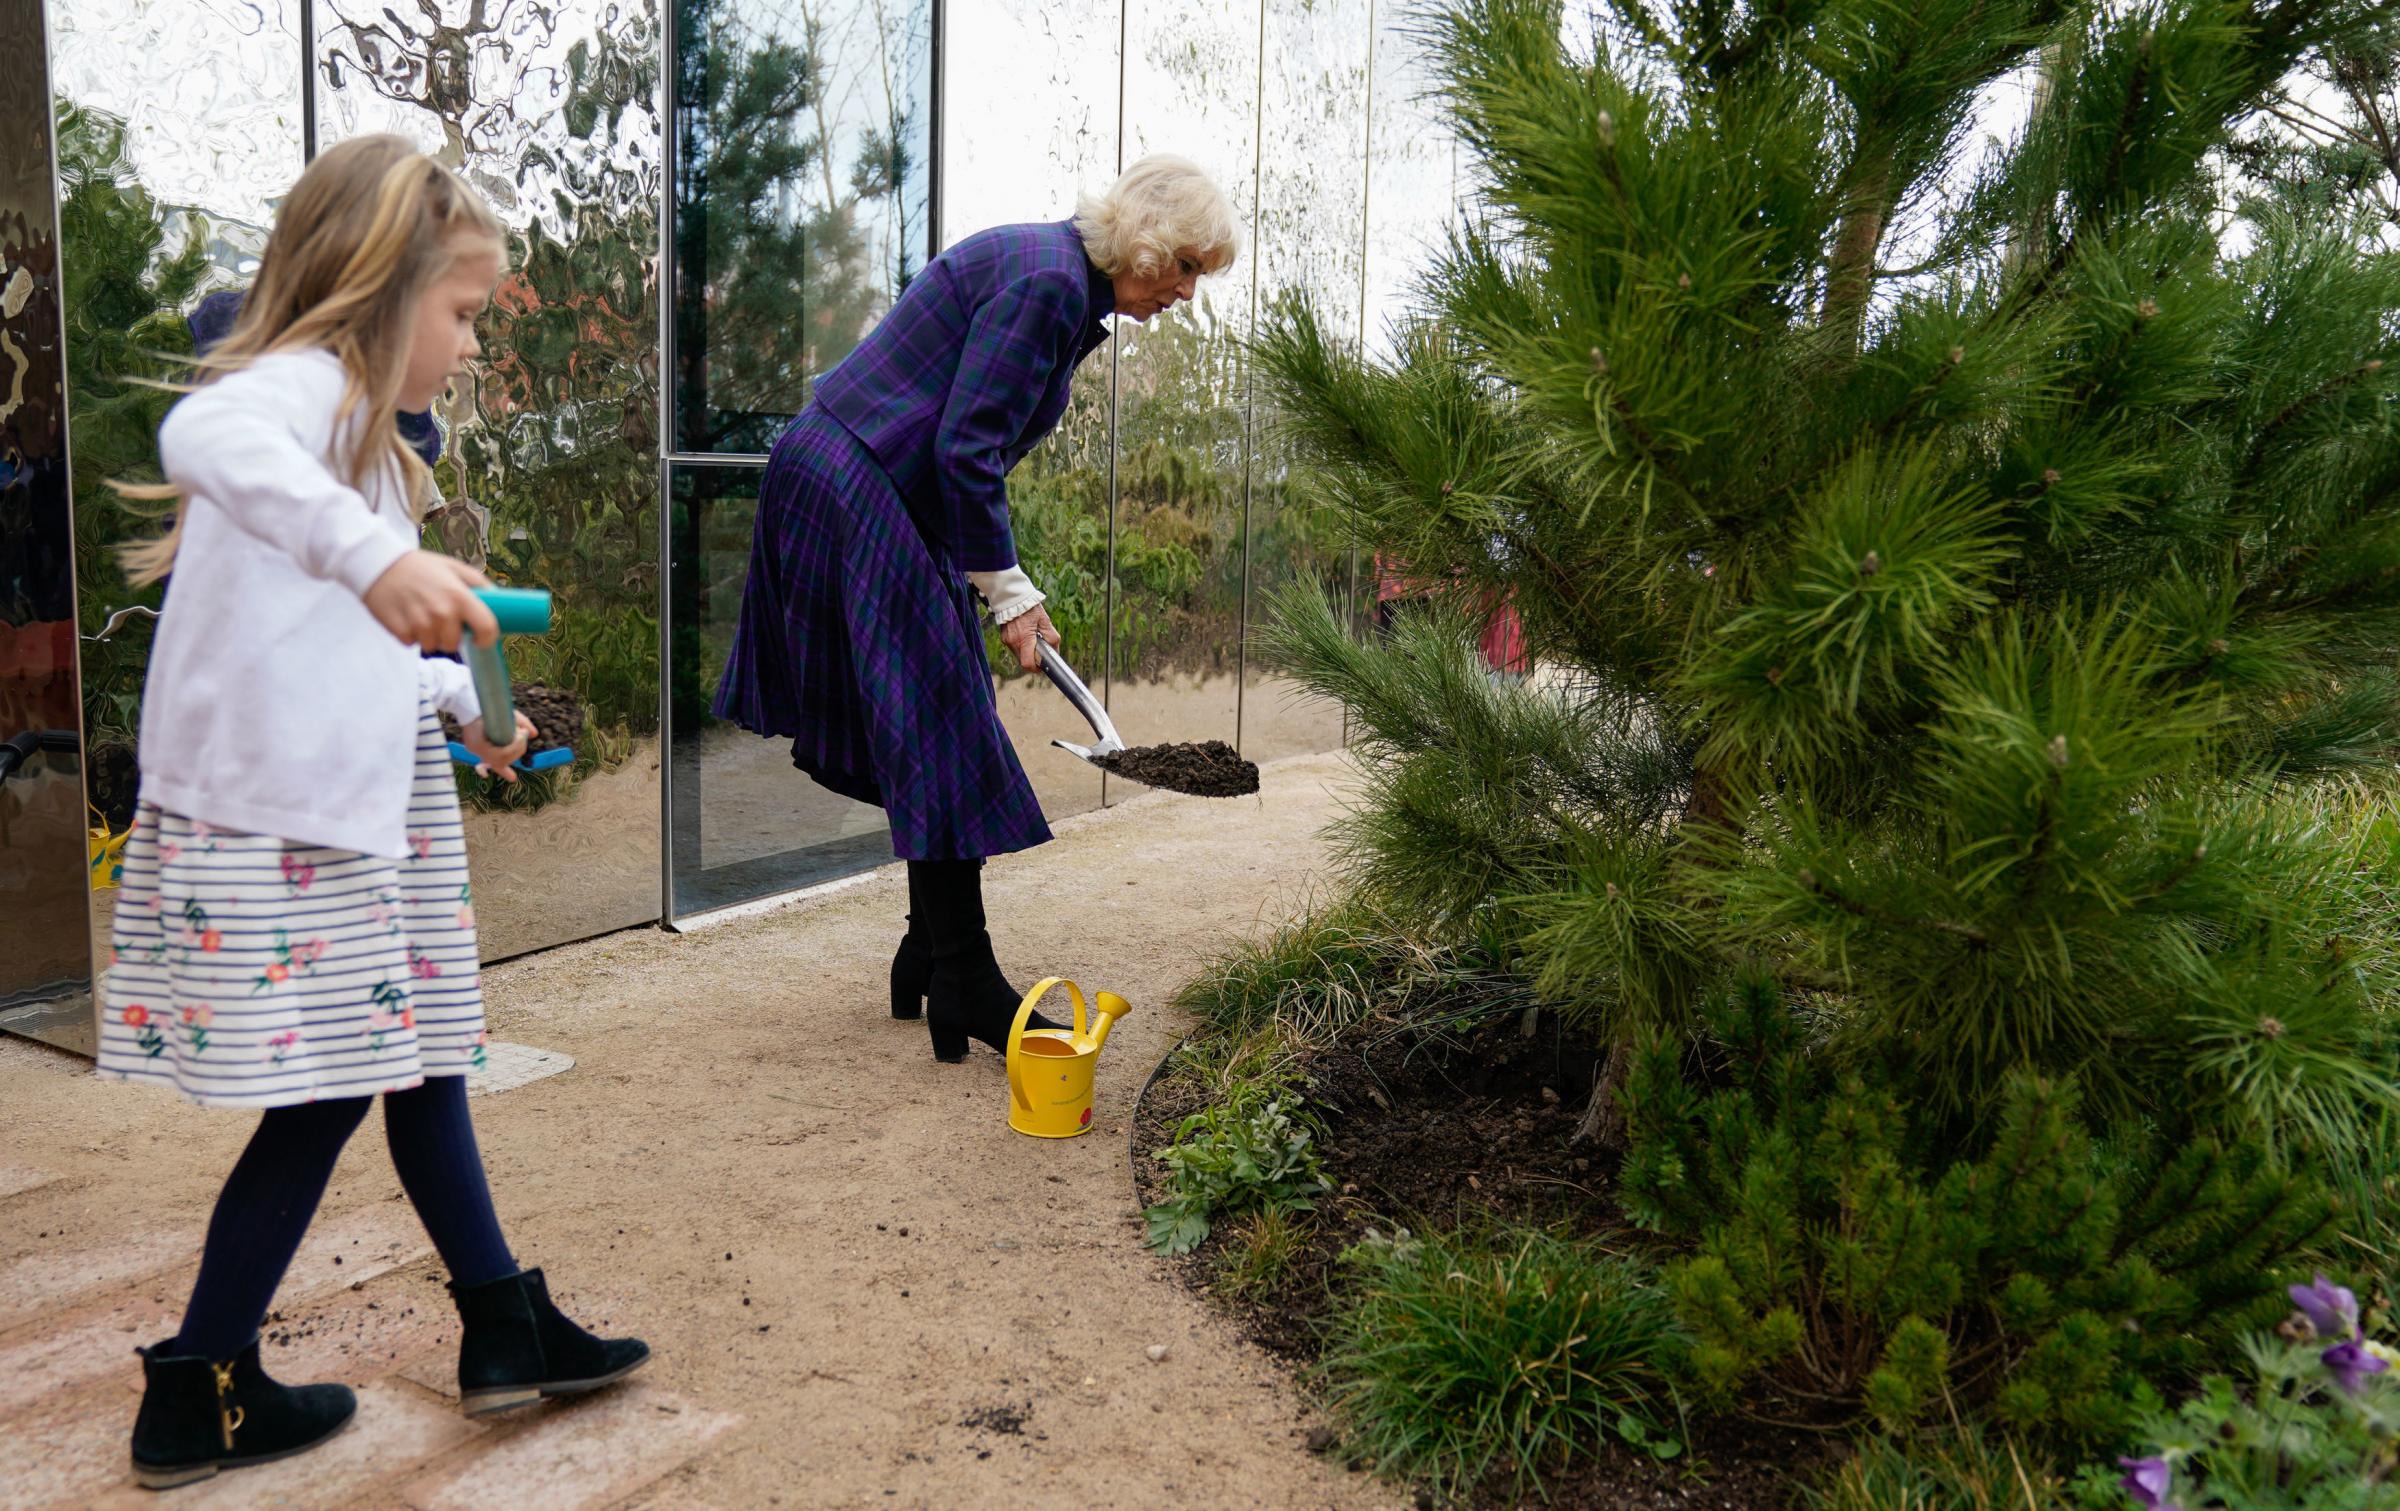 The Duchess of Cornwall (right) helps plant a tree with Isabelle Hewson during a visit to the charity Maggies Southampton in the grounds of University Hospital Southampton. Picture date: Wednesday April 6, 2022. PA Photo. See PA story ROYAL Camilla.